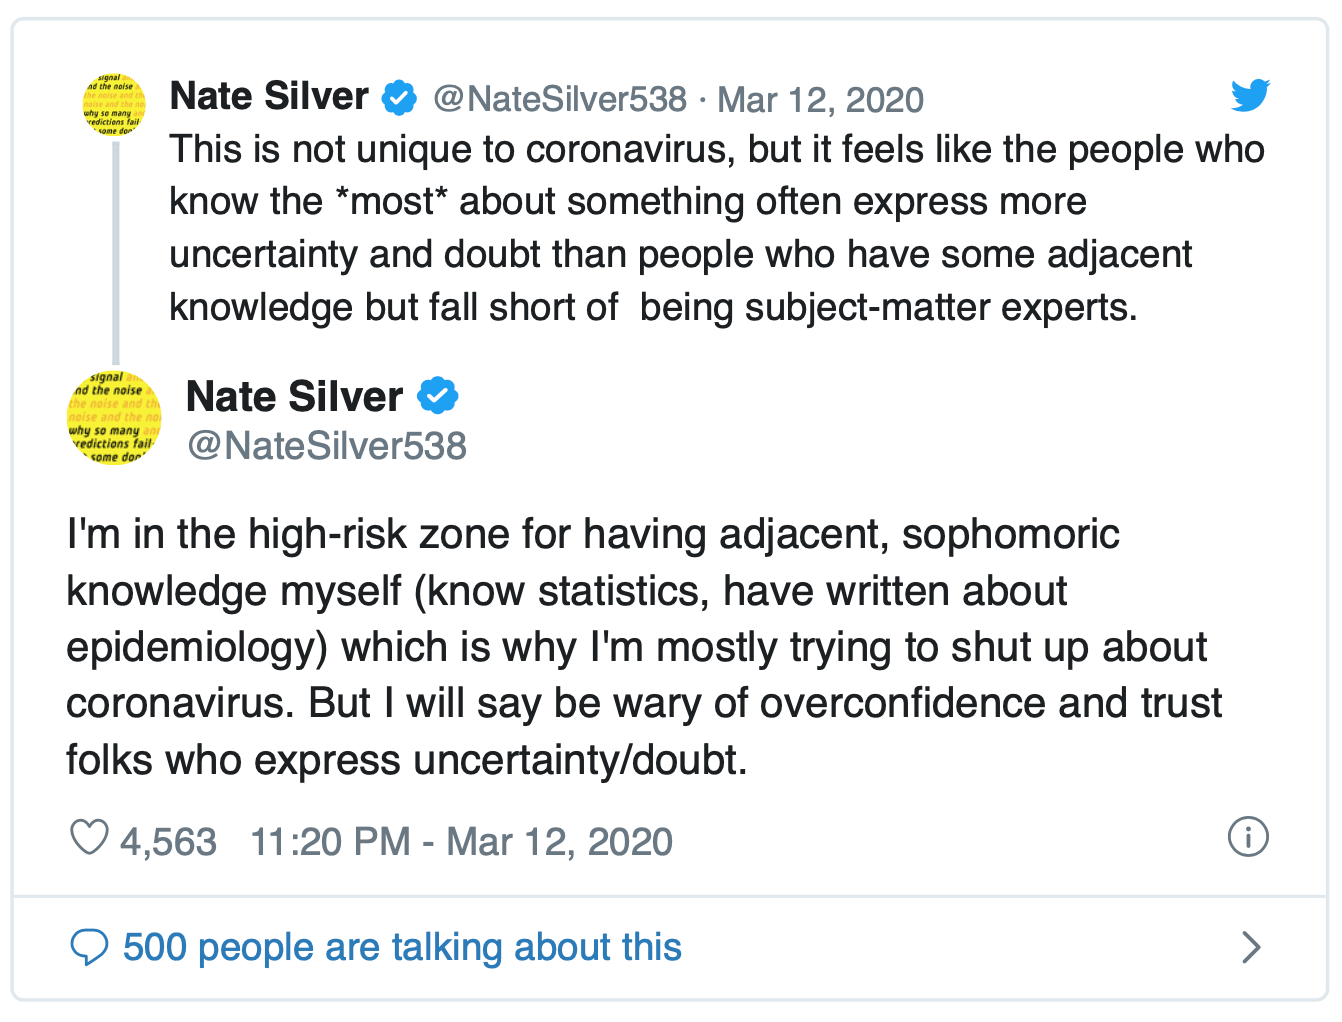 Tweet by Nate Silver: "This is not unique to coronavirus, but it feels like the people who know the *most* about something often express more uncertainty and doubt than people who have some adjacent knowledge but fall short of  being subject-matter experts. [...] I'm in the high-risk zone for having adjacent, sophomoric knowledge myself (know statistics, have written about epidemiology) which is why I'm mostly trying to shut up about coronavirus. But I will say be wary of overconfidence and trust folks who express uncertainty/doubt."